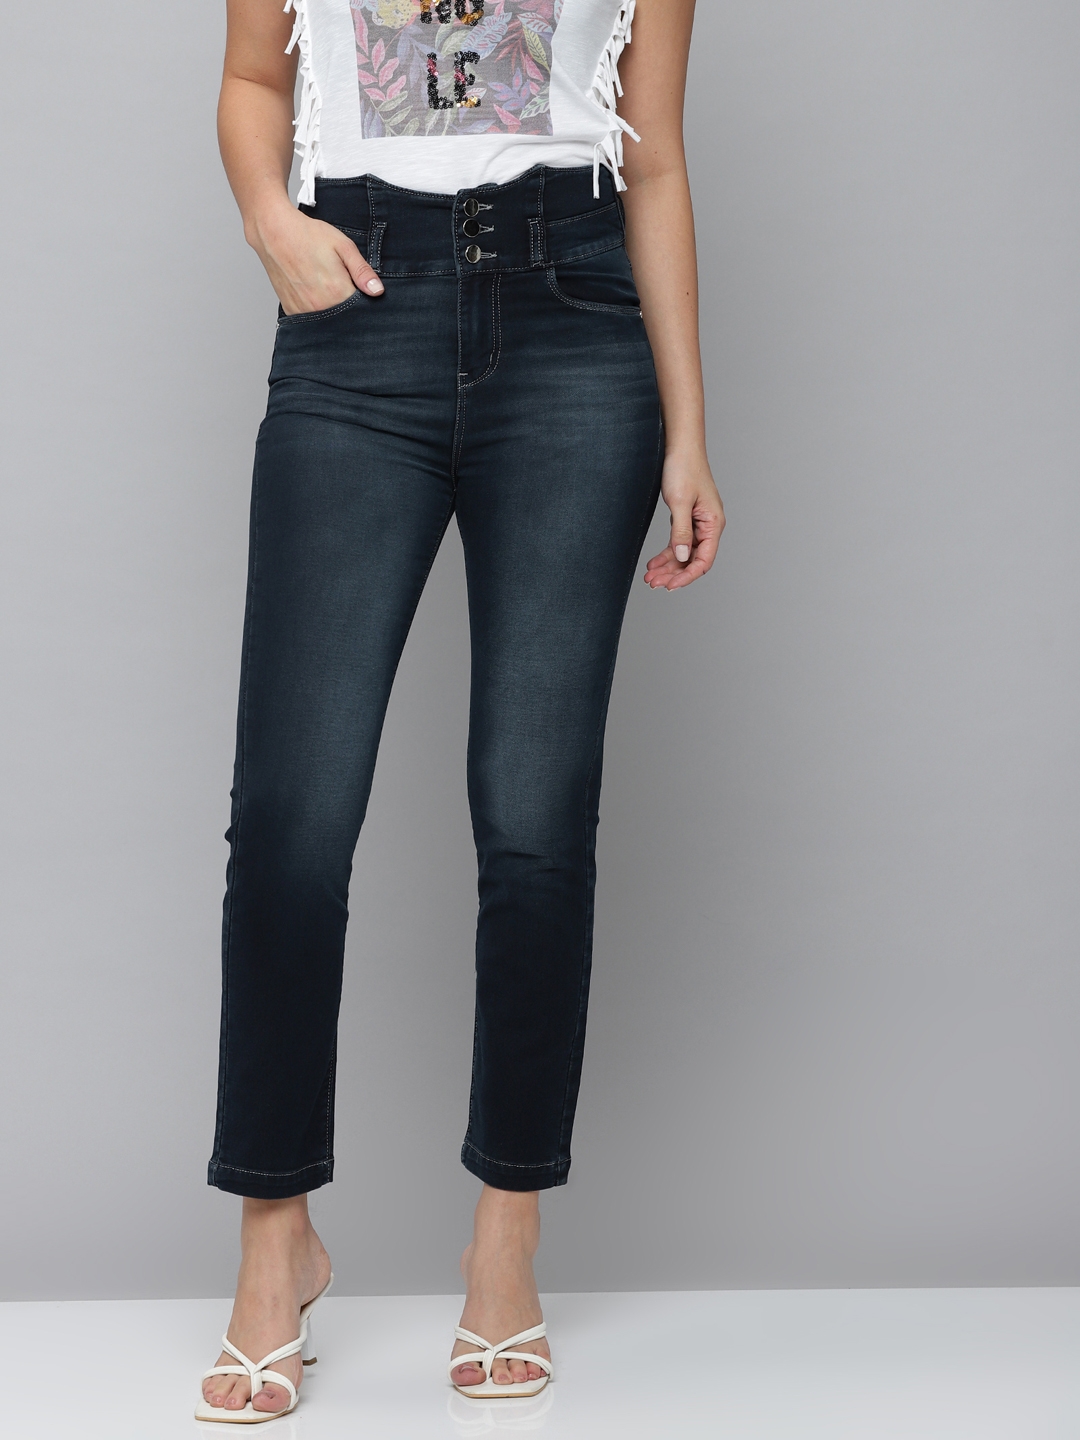 SHOWOFF Women's High-Rise Blue Clean Look Jeans